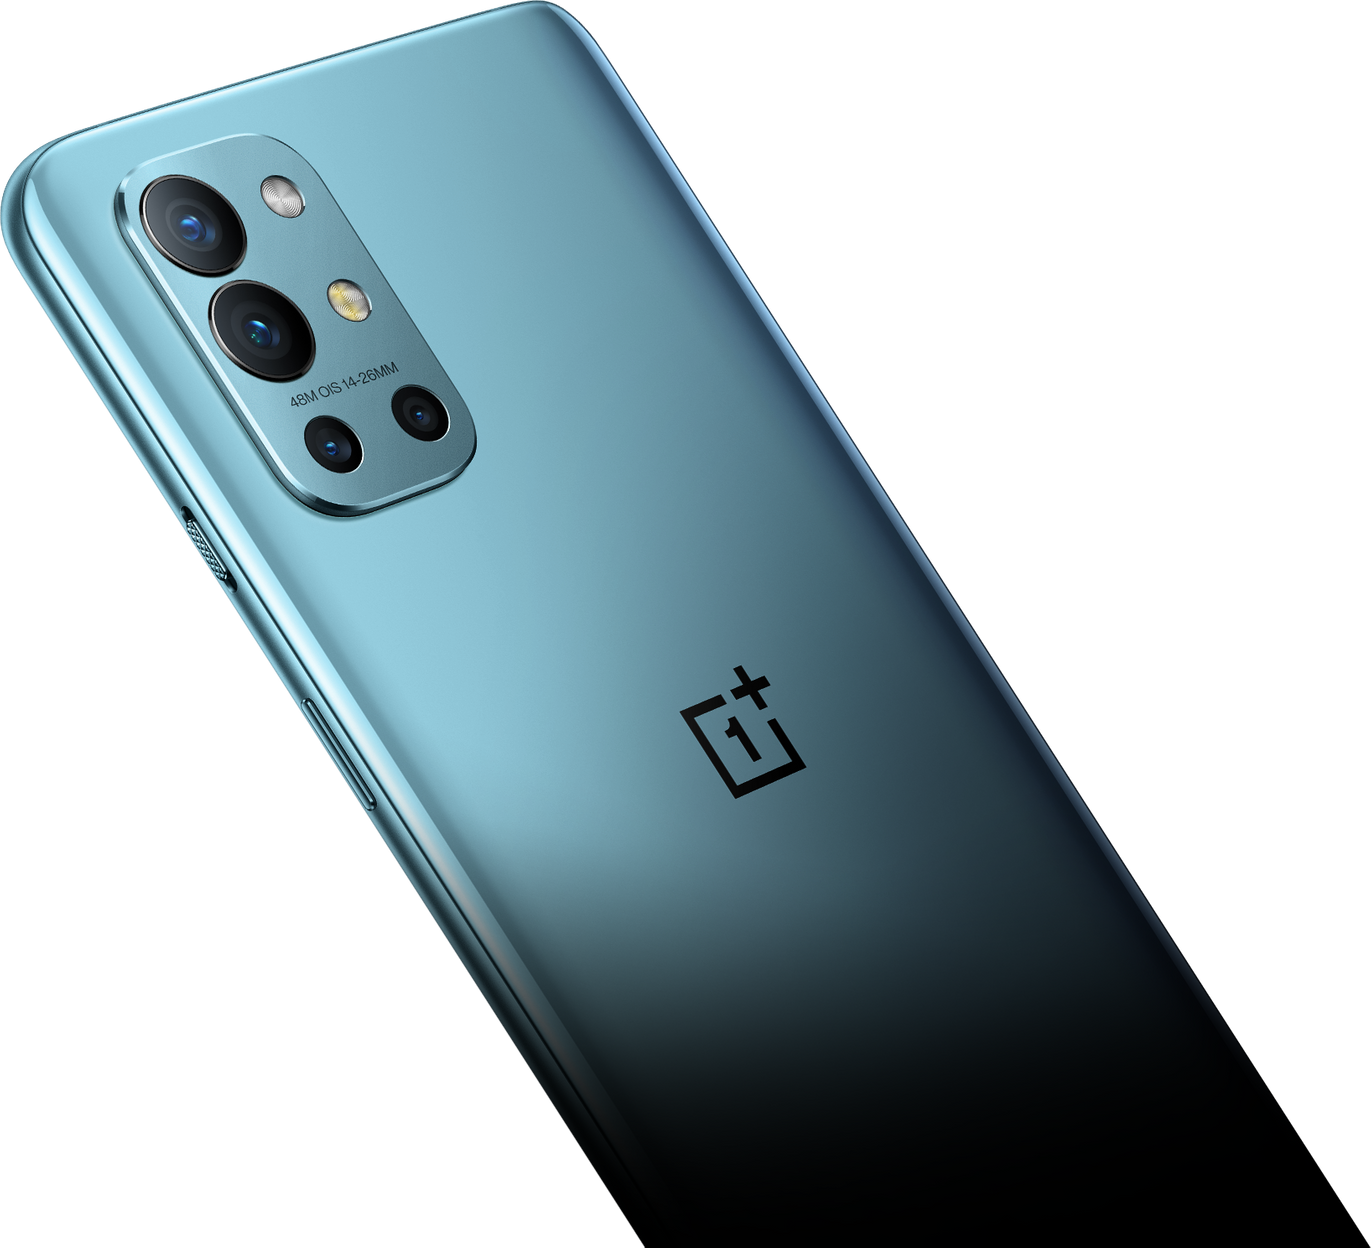 OnePlus 9R Review: New Look with Refreshing Design - 24 News Daily